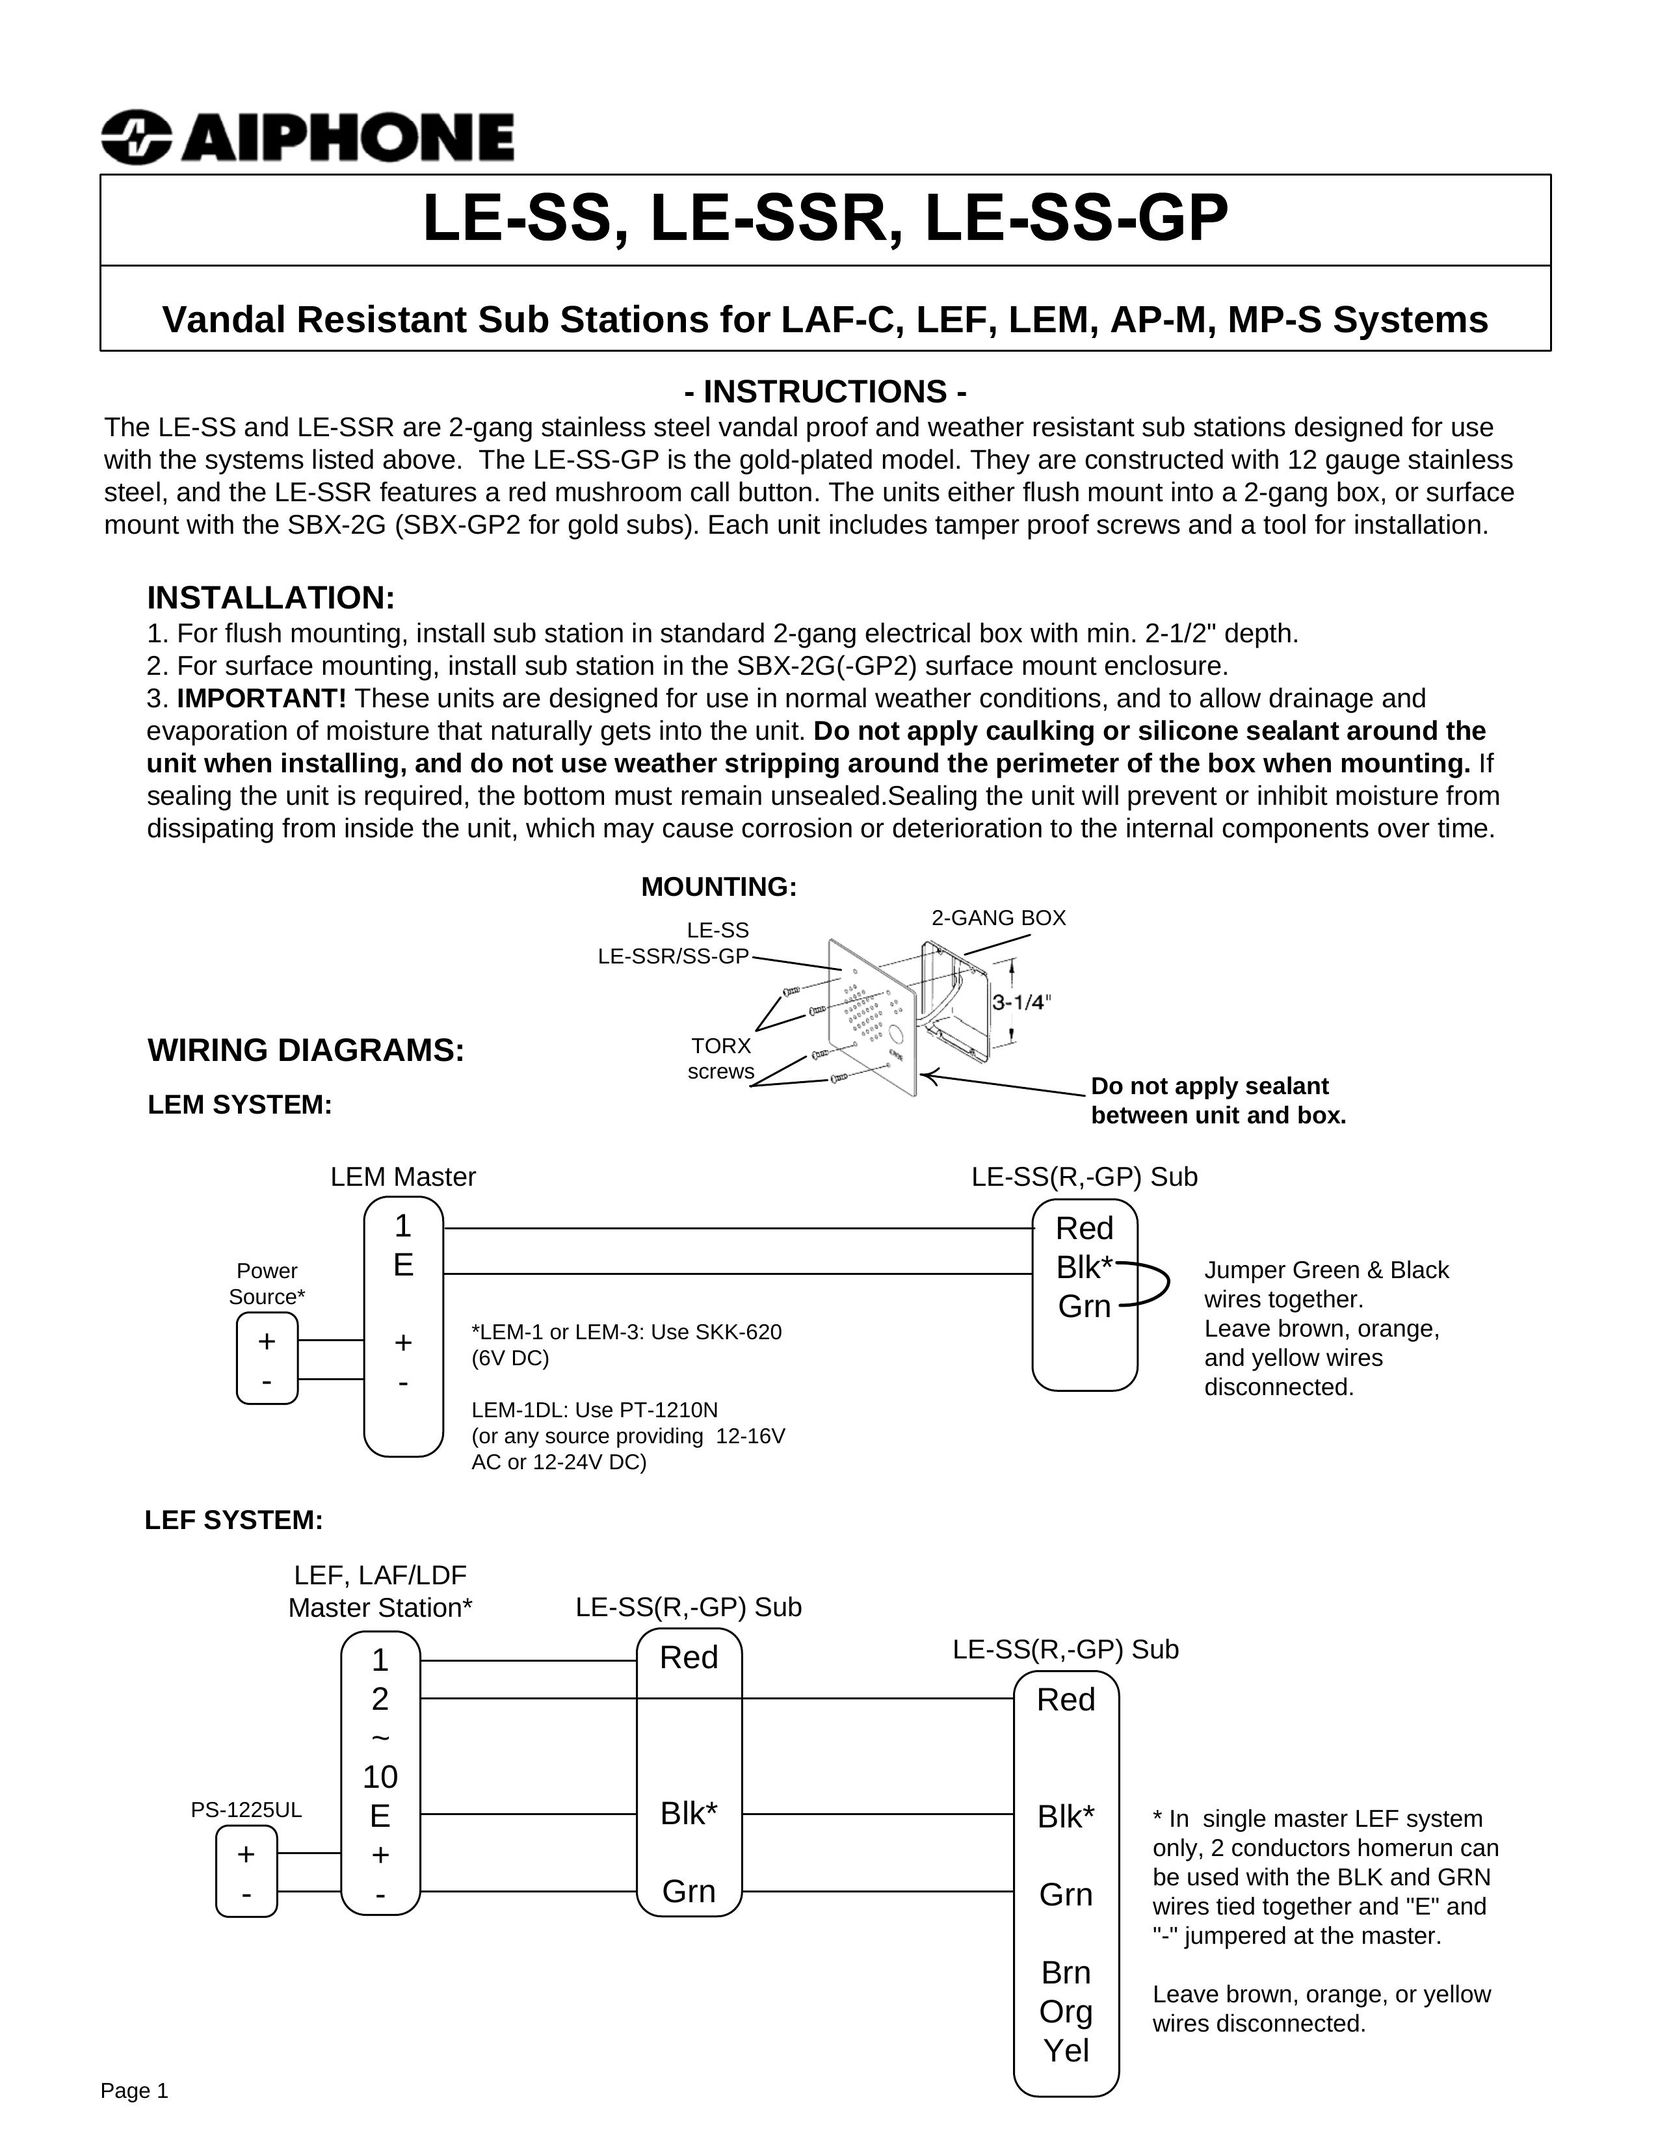 Aiphone LE-SS Welder User Manual